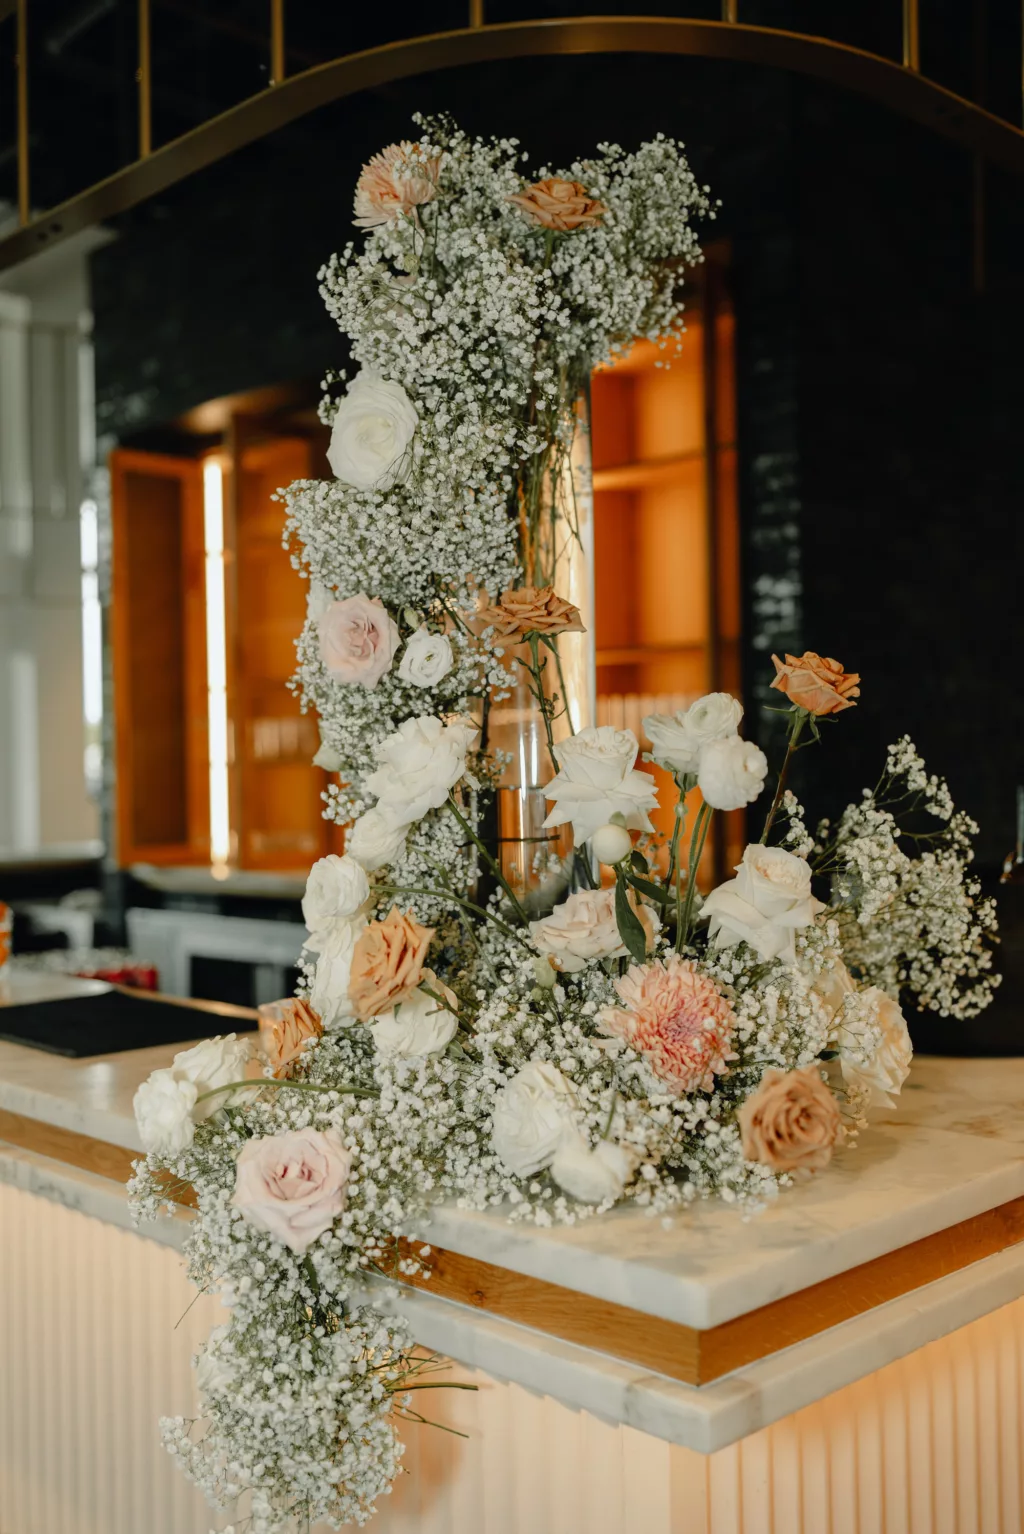 Cascading Wedding Reception Flower Arrangement Decor Ideas with Baby's Breath, White Roses, Pink Roses and Chrysanthemums